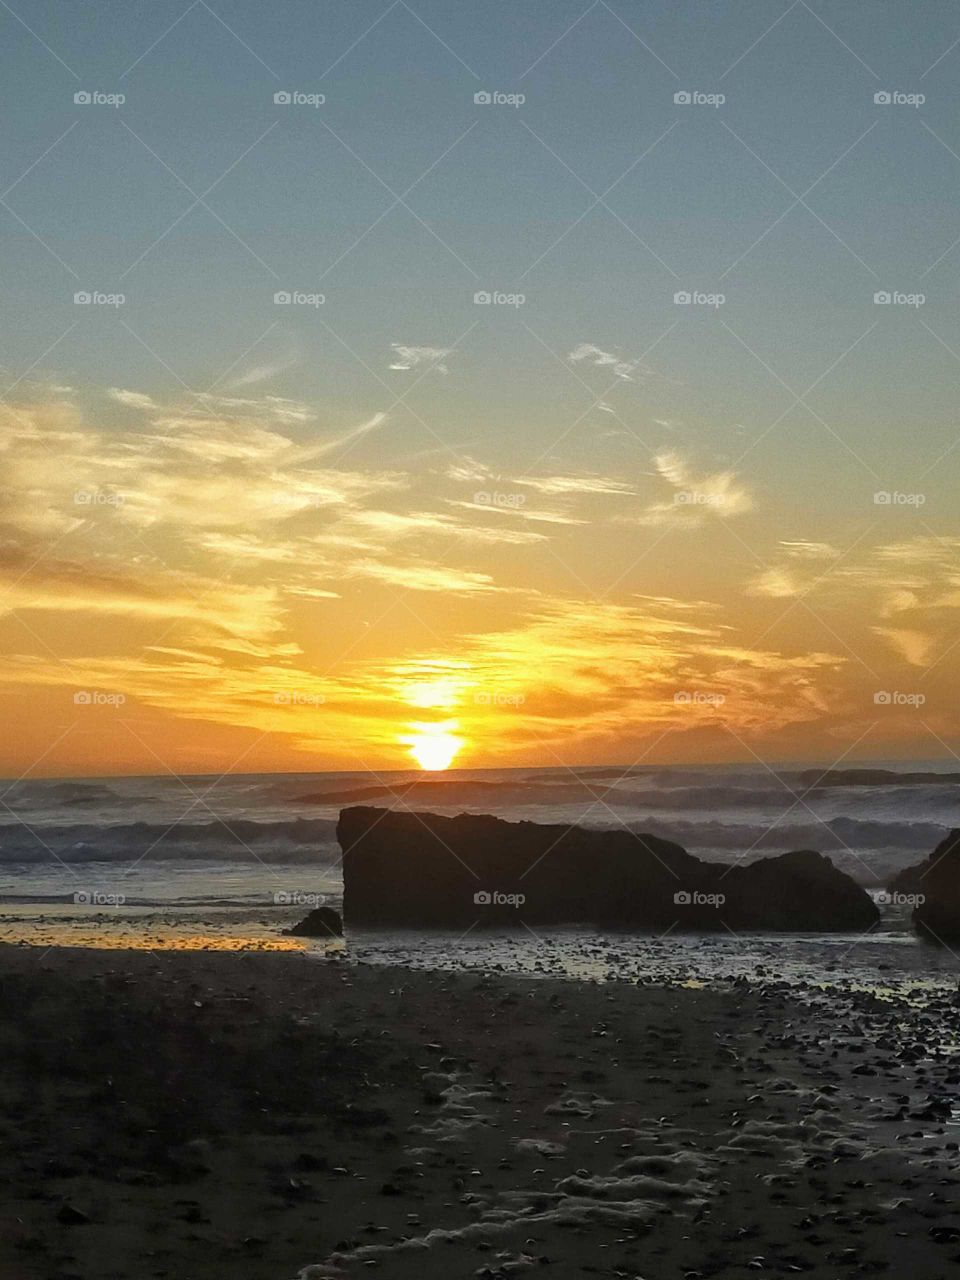 Sunset in Elgzira beach in the region of Ifni,Morocco...an amazing sunset ...